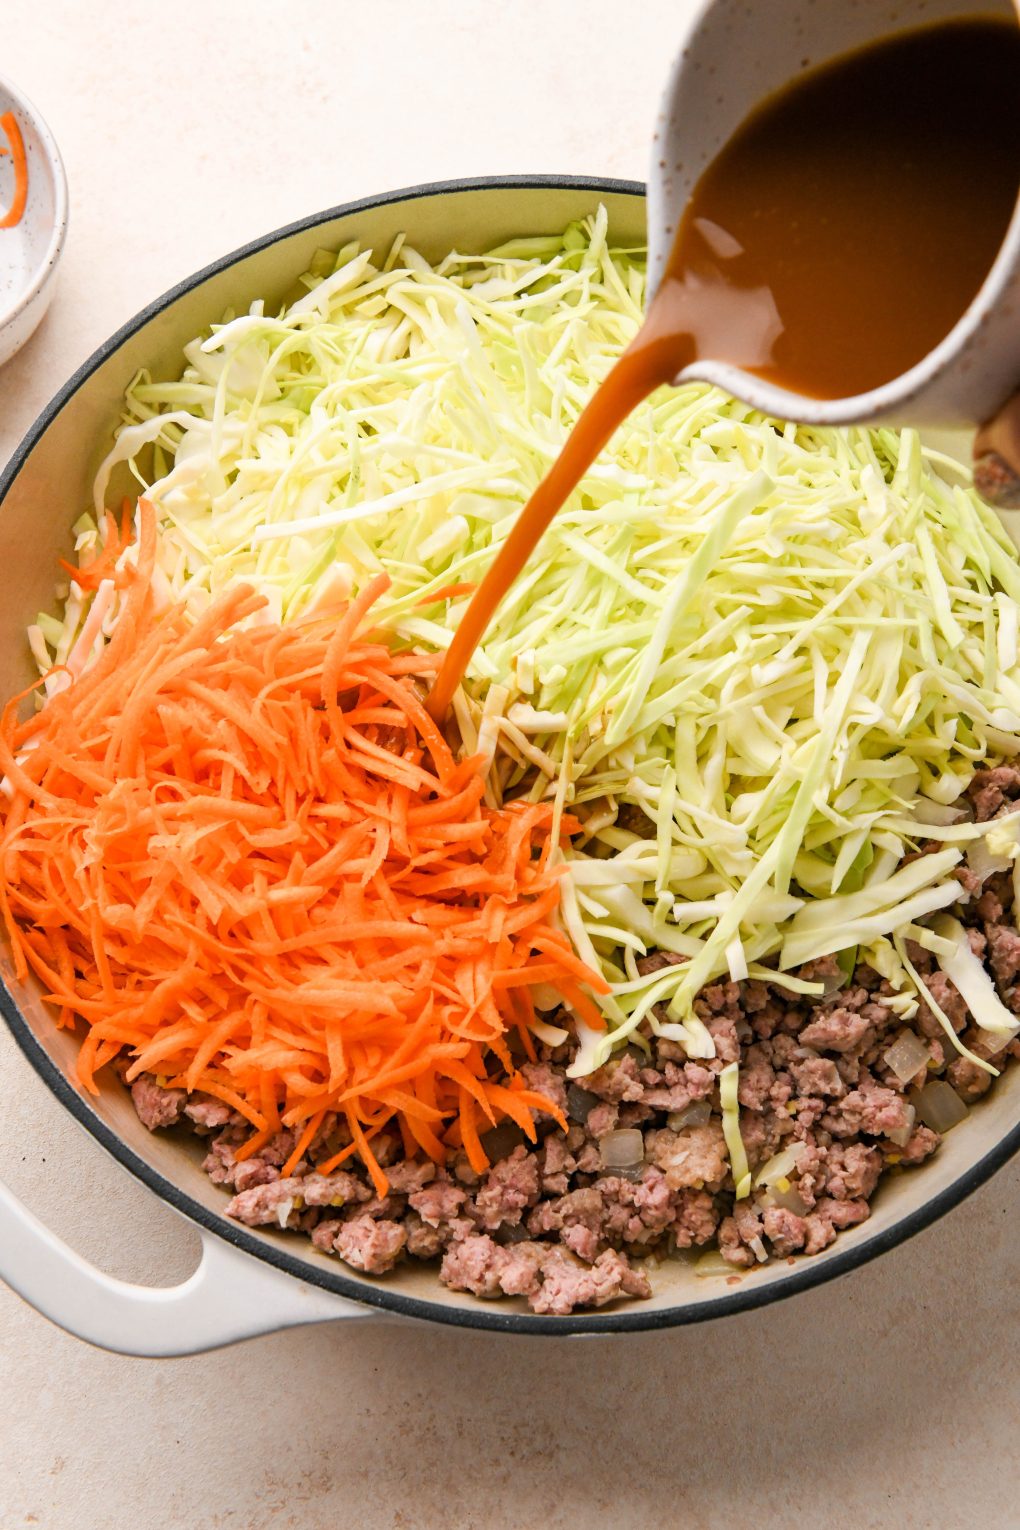 How to make Egg Roll in a Bowl: Sauce being poured in on top of the shredded cabbage and carrots.